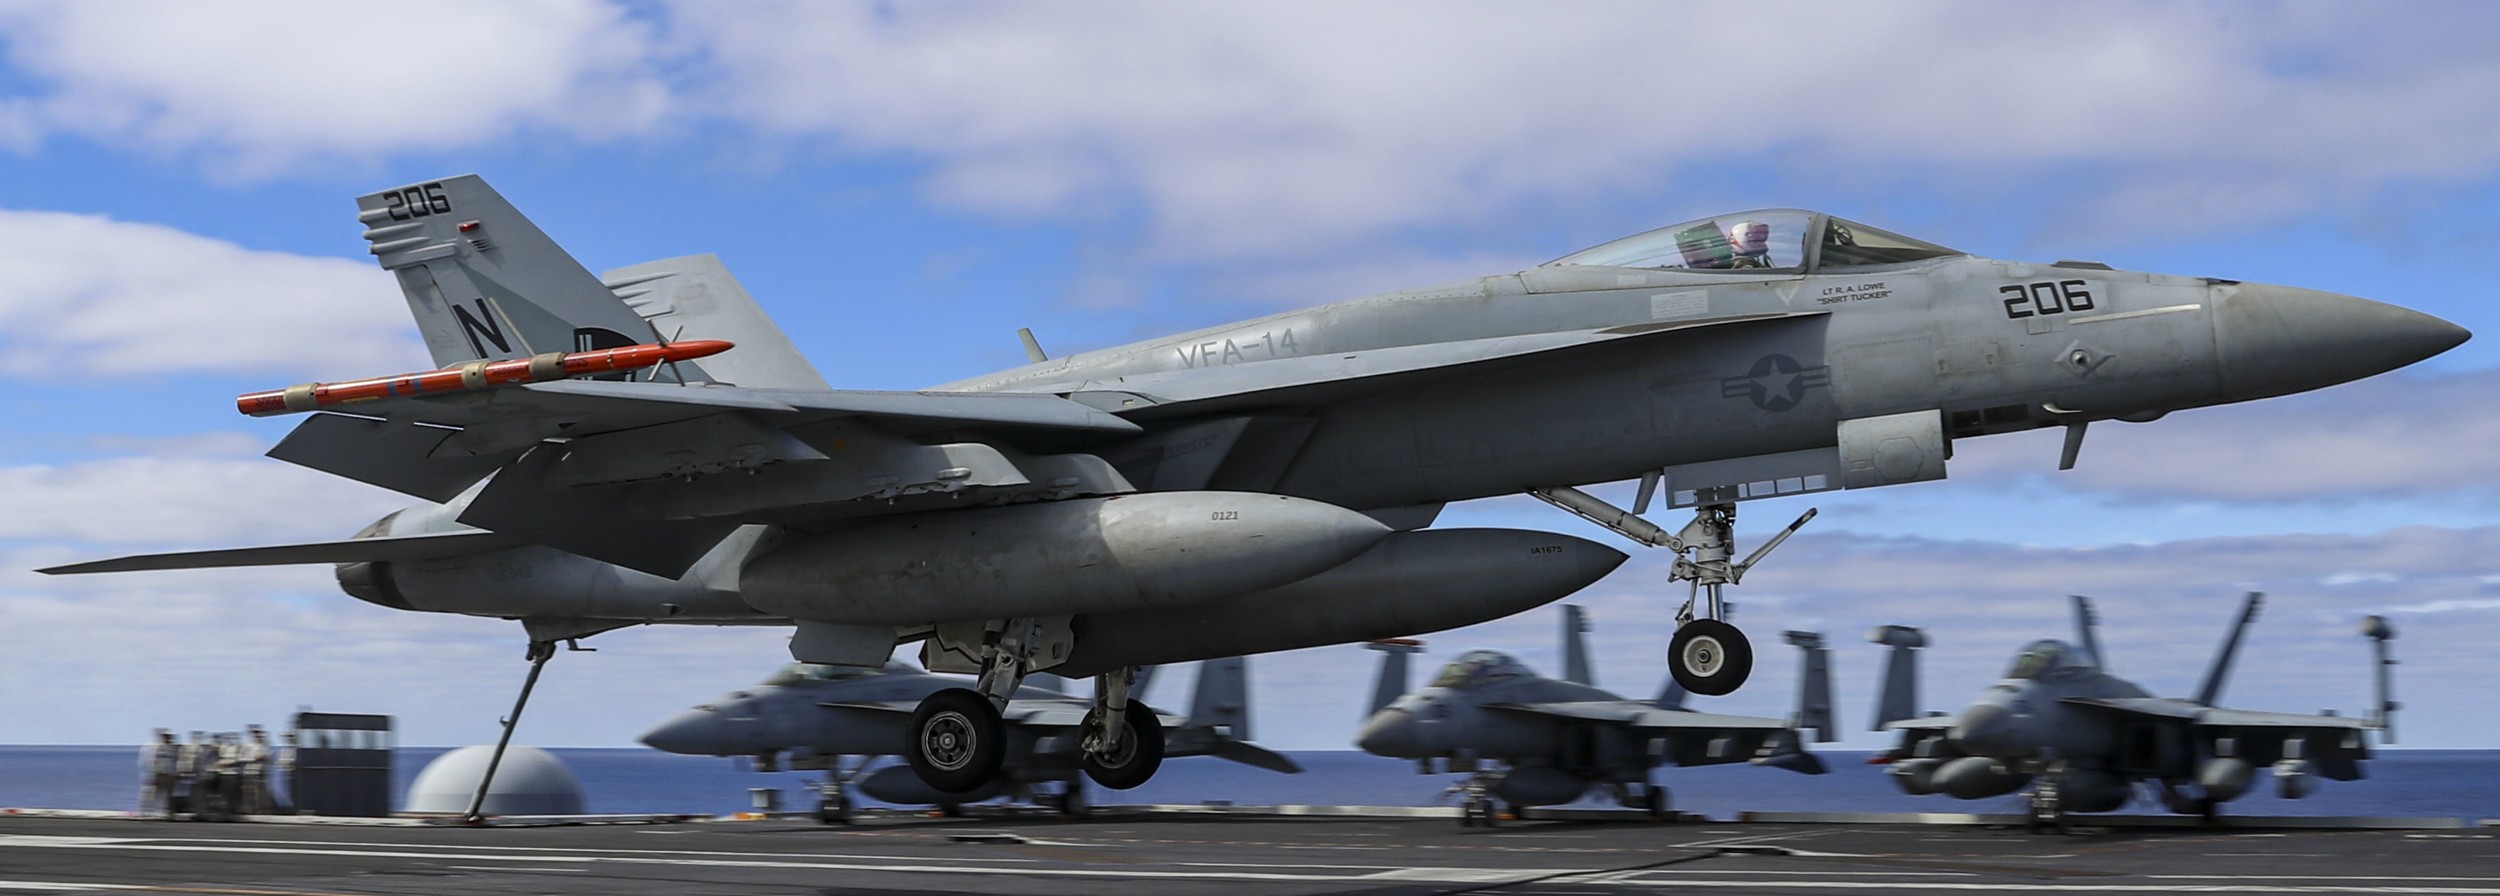 vfa-14 tophatters strike fighter squadron f/a-18e super hornet cvn-72 uss abraham lincoln cvw-9 us navy 50